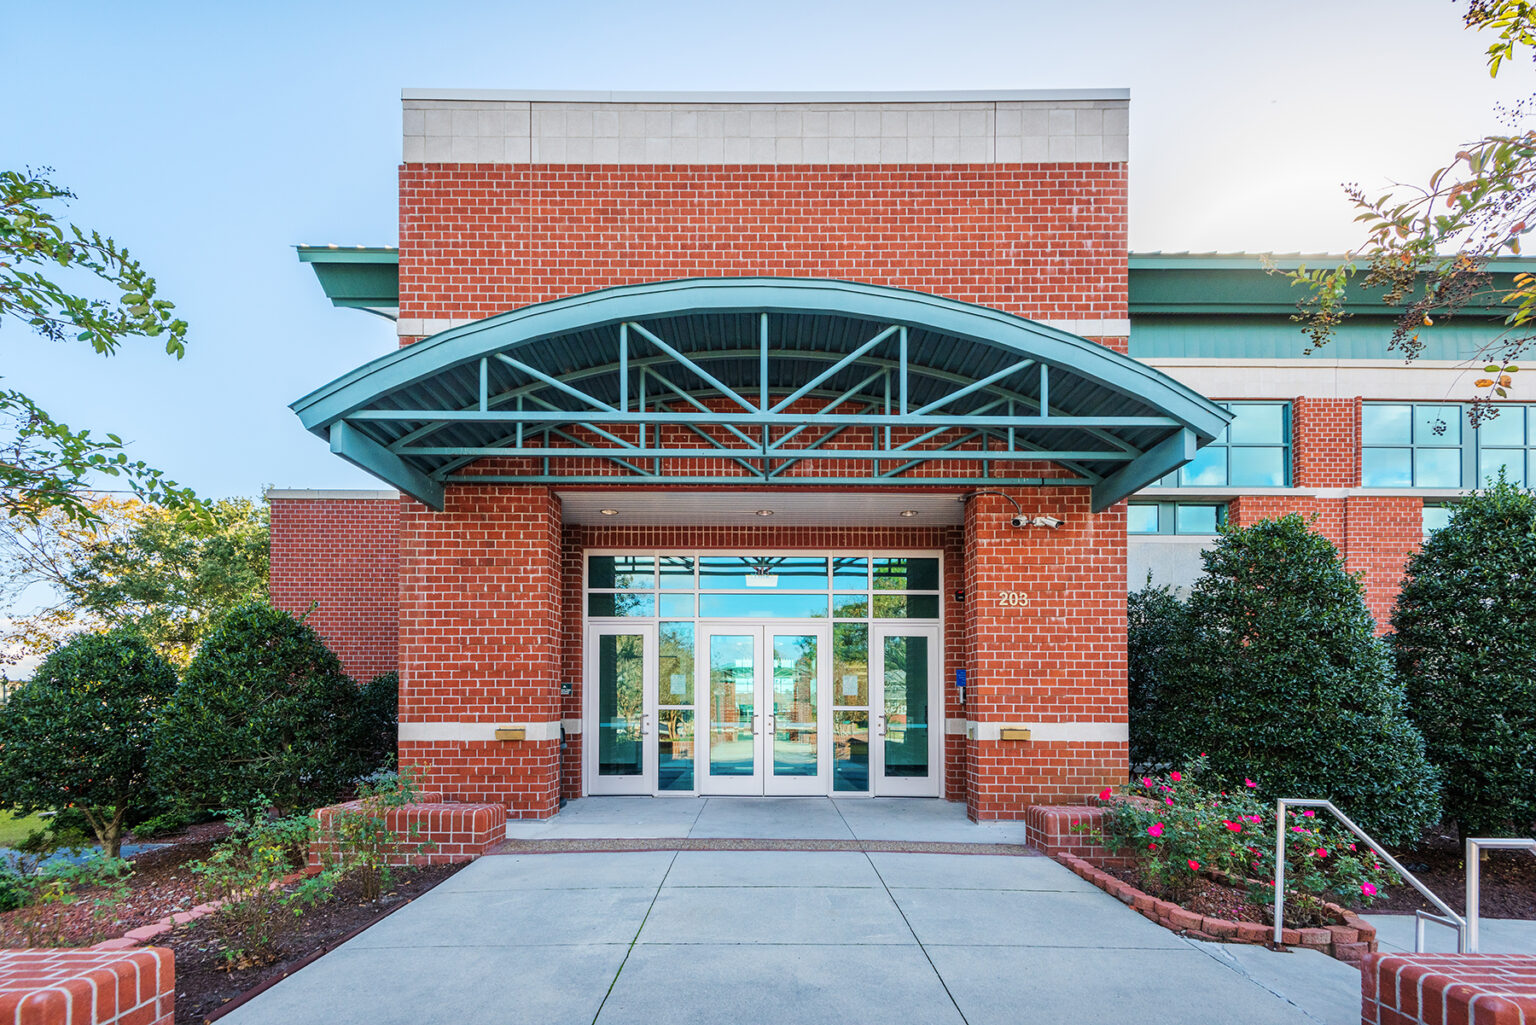 Main entrance of New Bern Riverfront Convention Center Barnhill